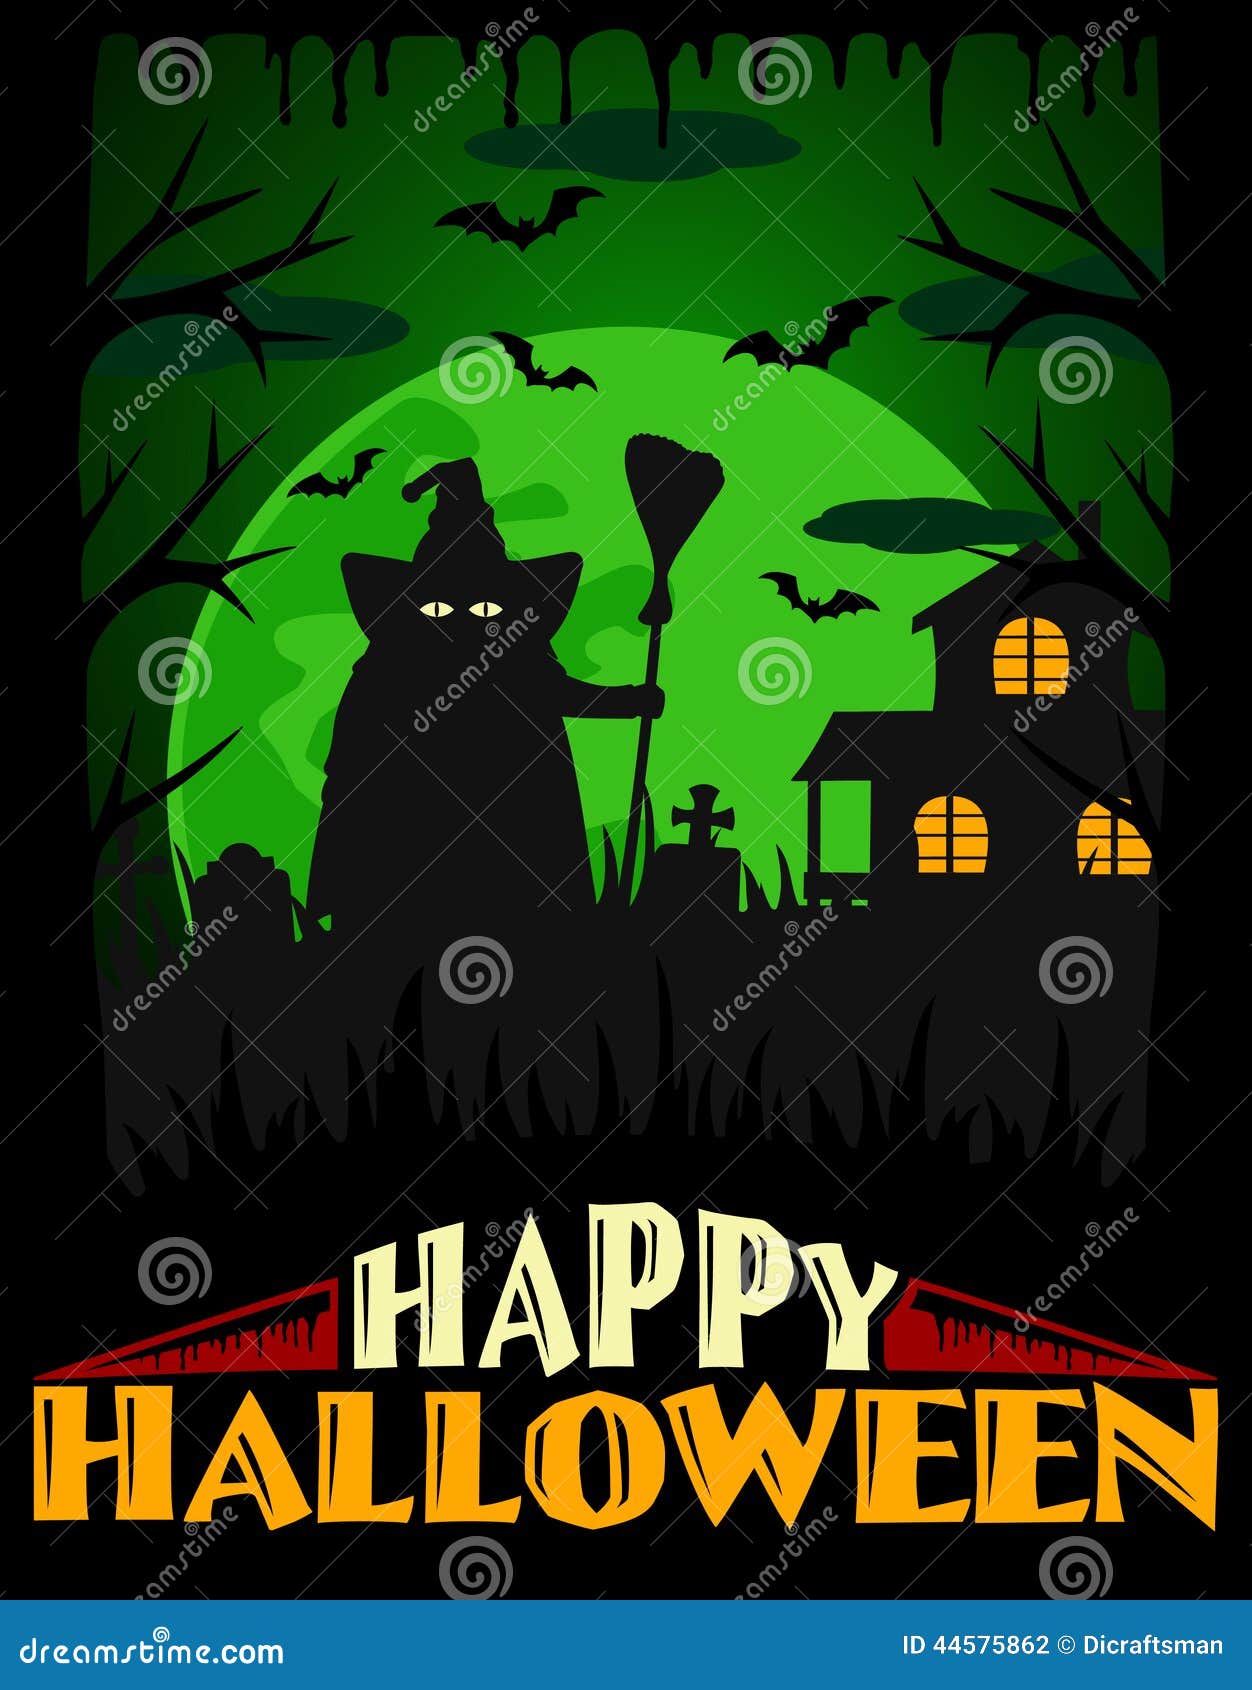 Scary Halloween Background Green Stock Vector - Image: 44575862